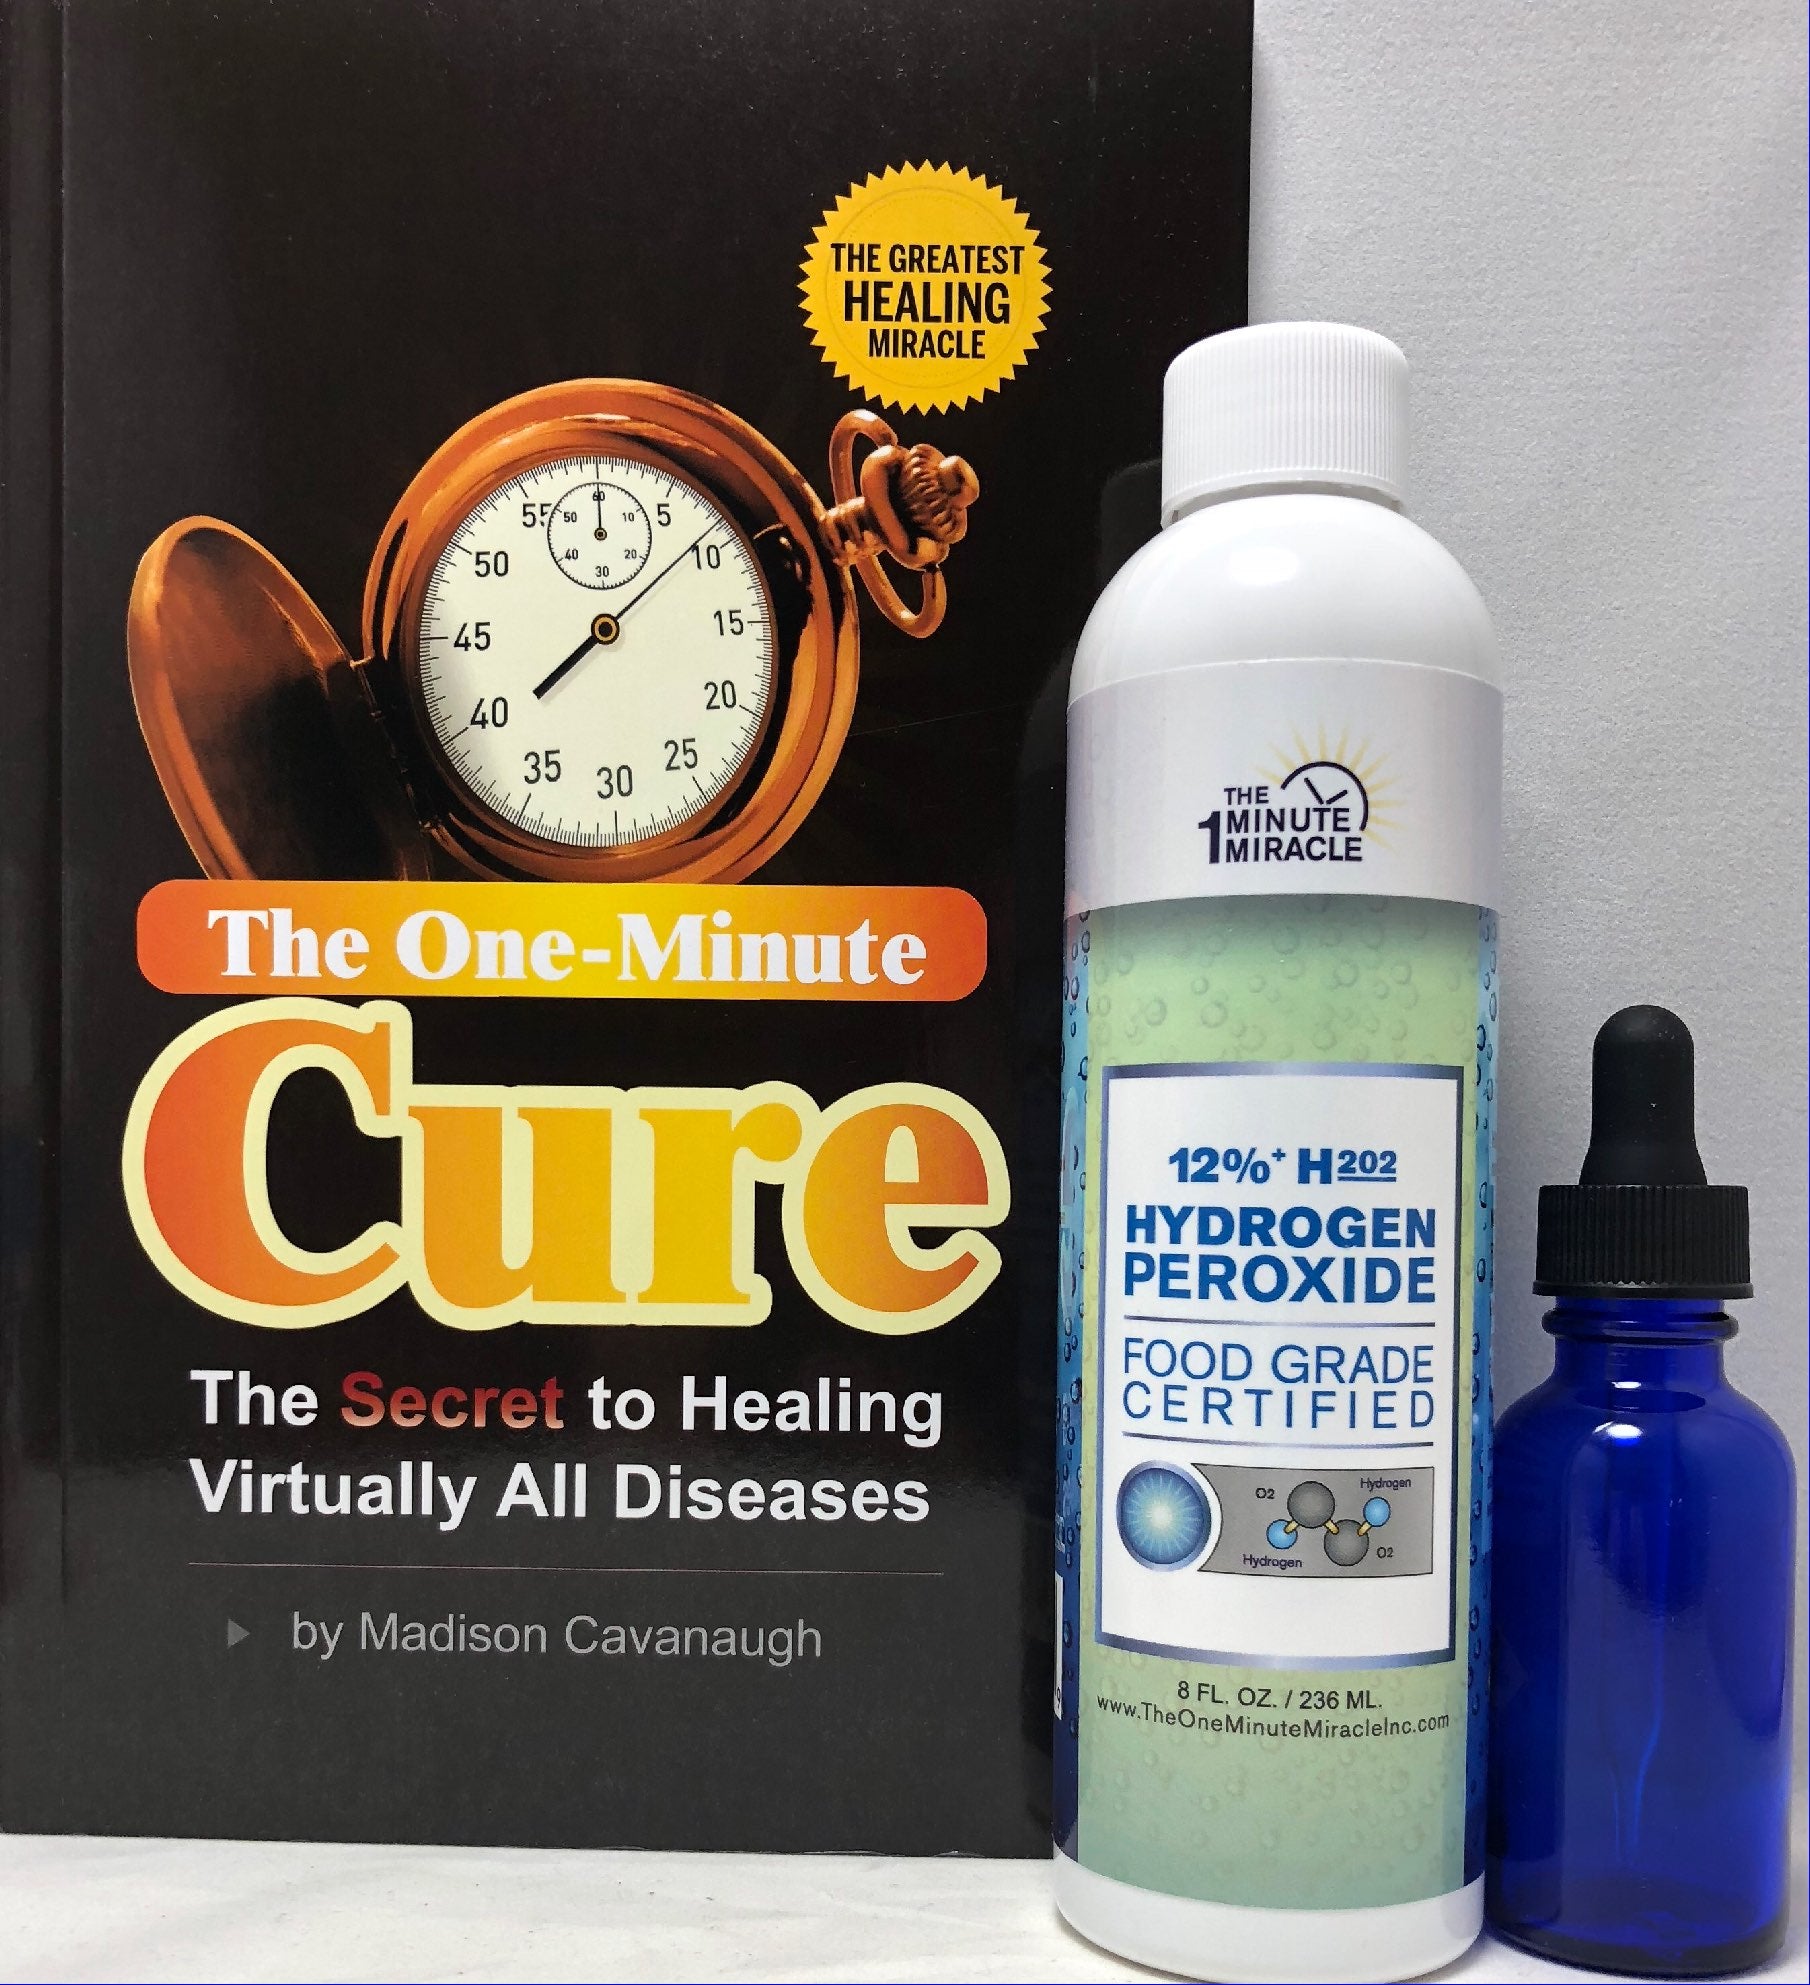 The Minute Cure Book and 12% Food Grade H2O2 - 8 oz Bottle